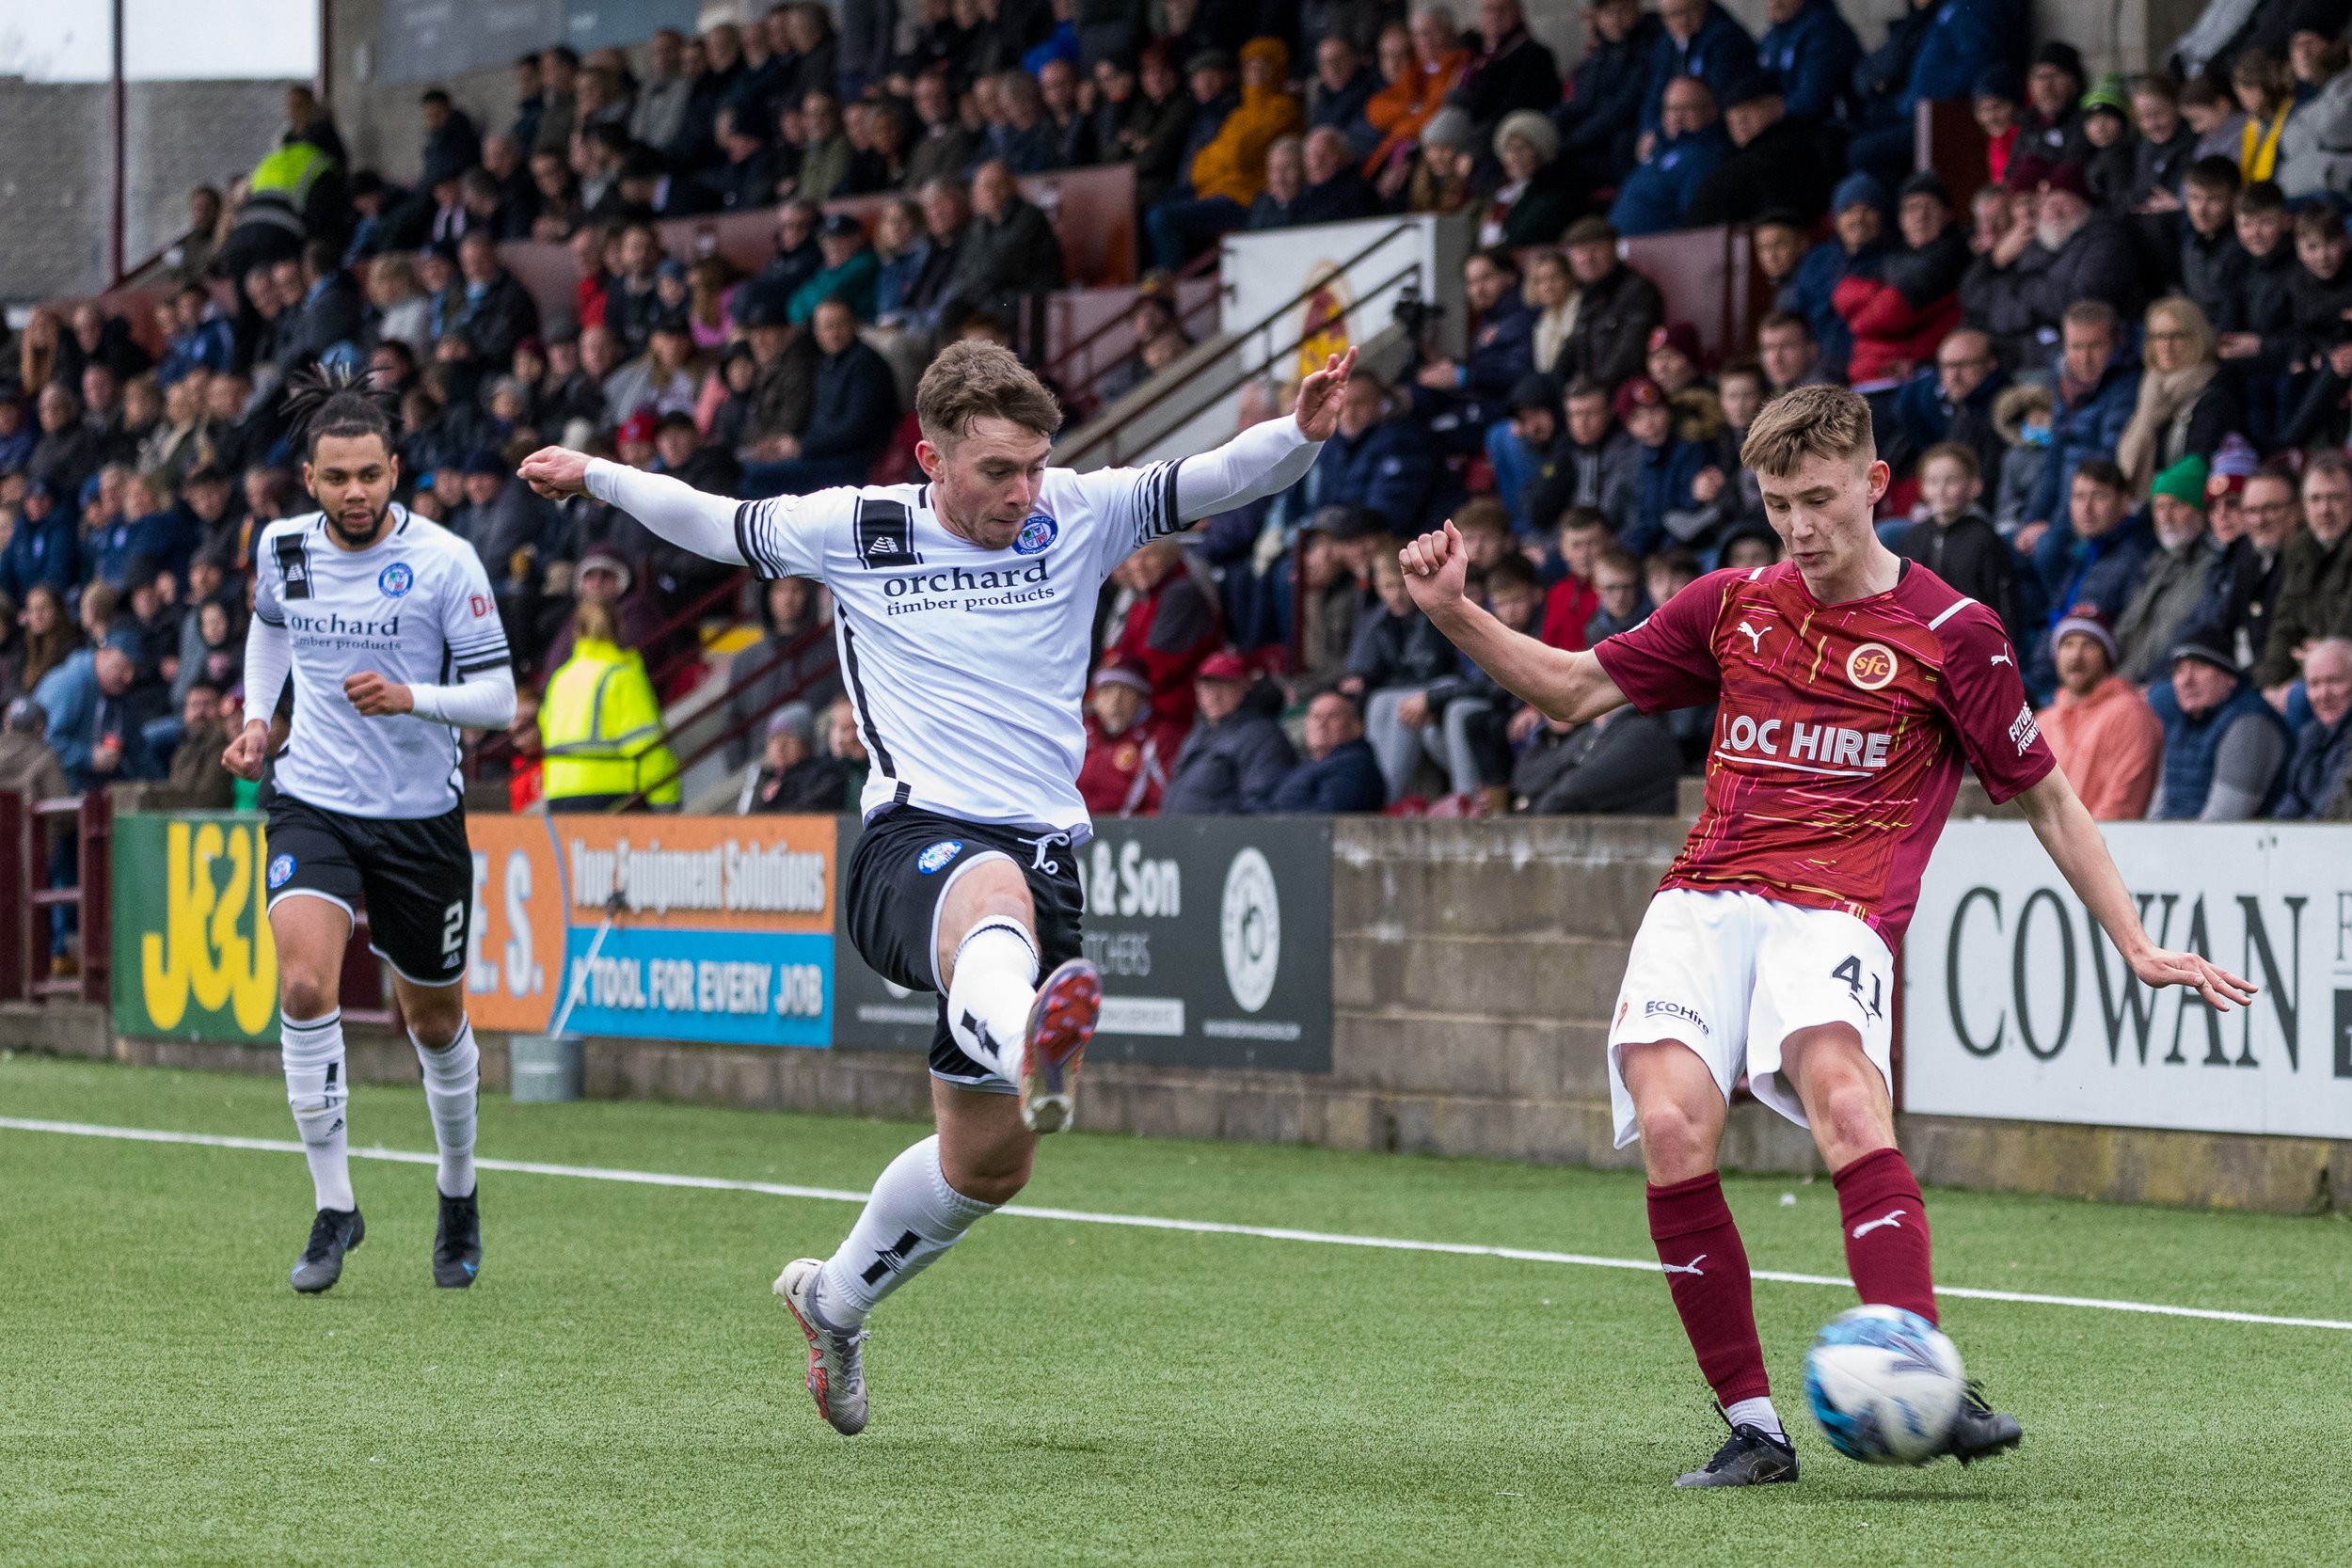  Forfar player attempts to block a cross from Stenhousemuir’s Jacob Blaney  